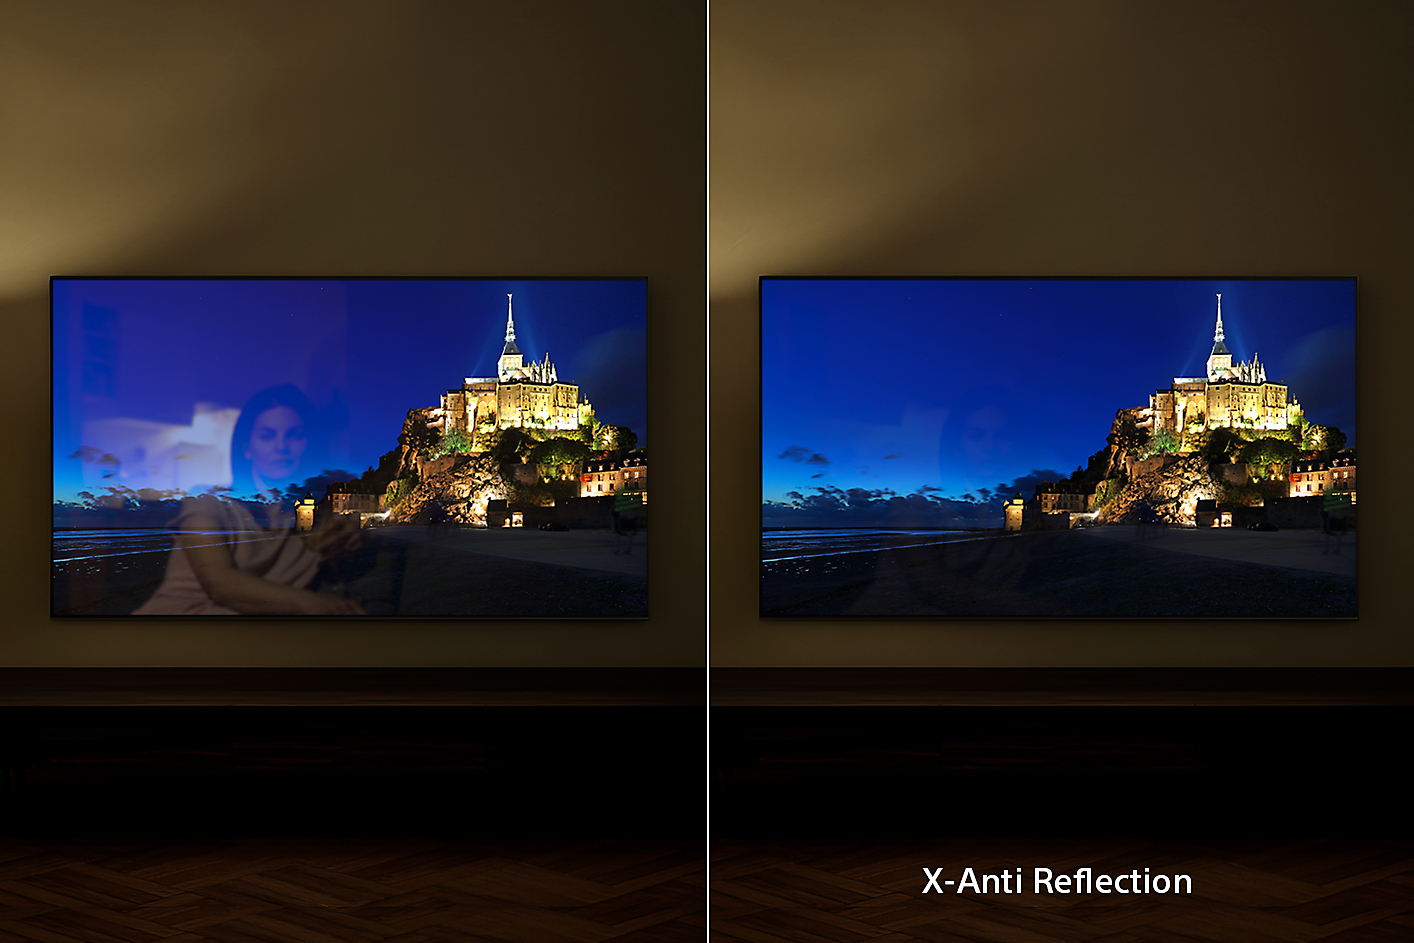 Two wall-mounted BRAVIA TVs with screenshots of a hilltop city with right image showing benefits of X-Anti Reflection